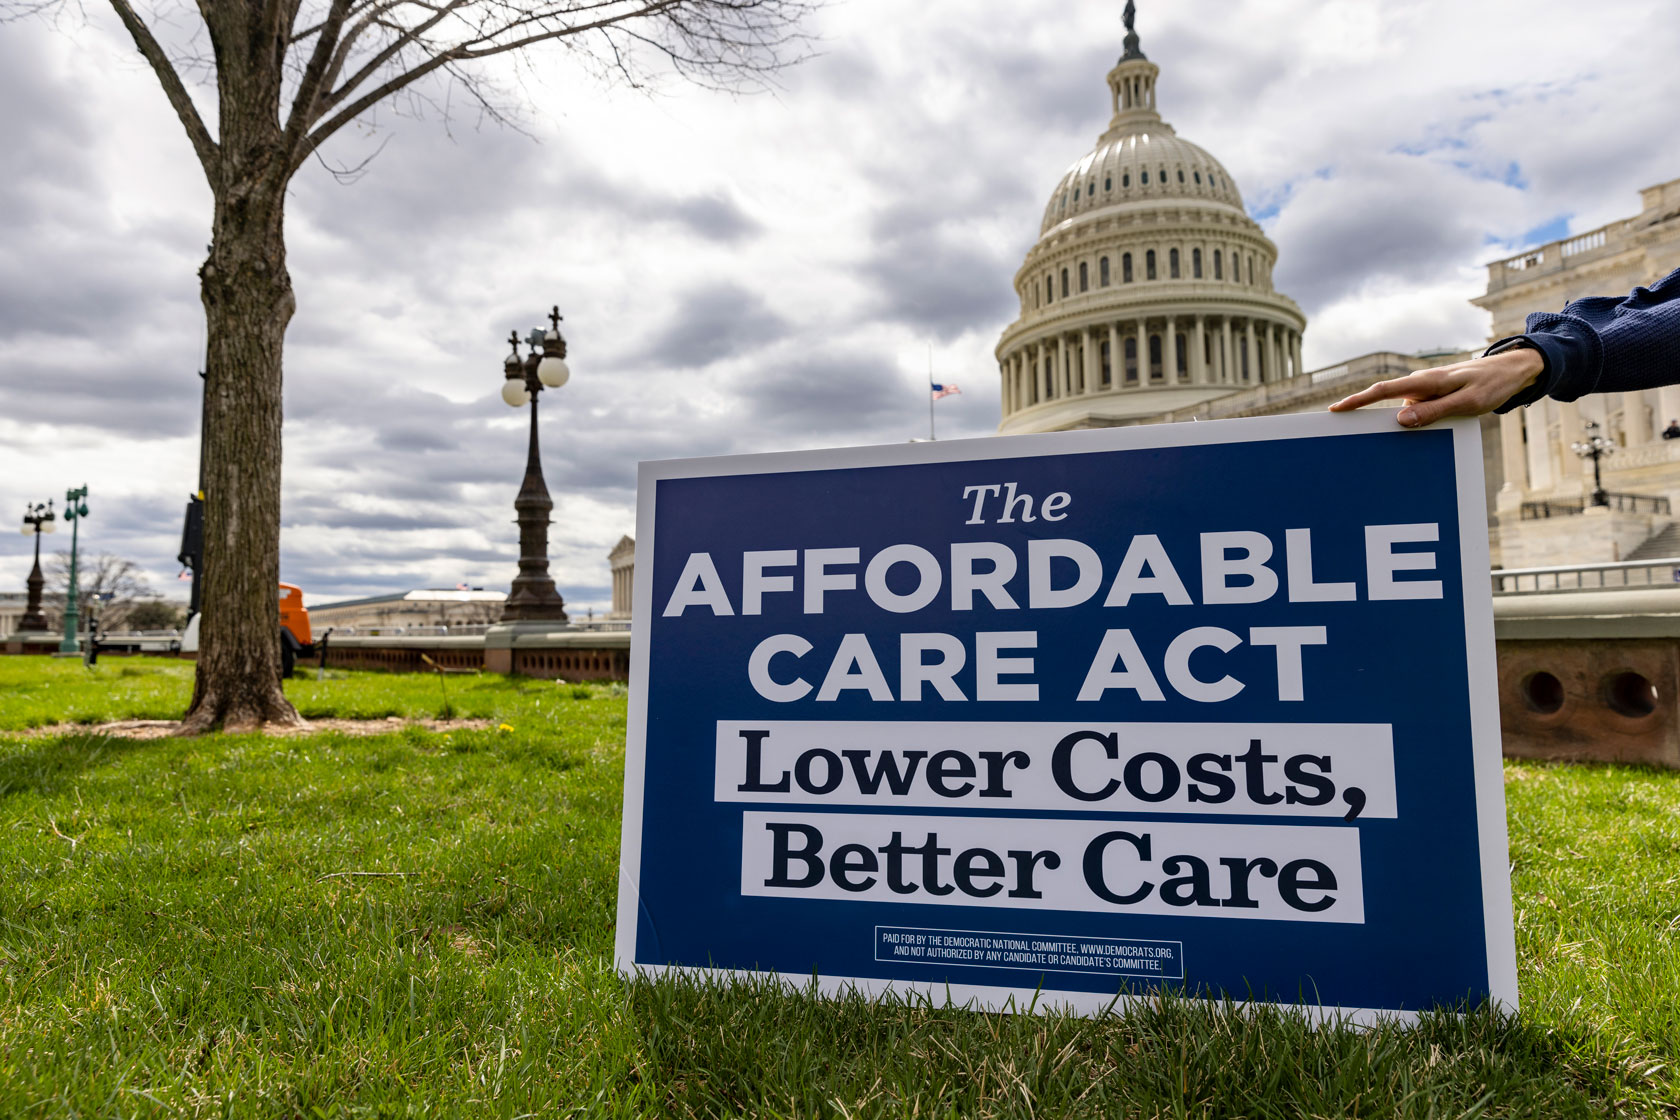 A sign demonstrating support of the Affordable Care Act is seen on a patch of grass in front of the U.S. Capitol building.